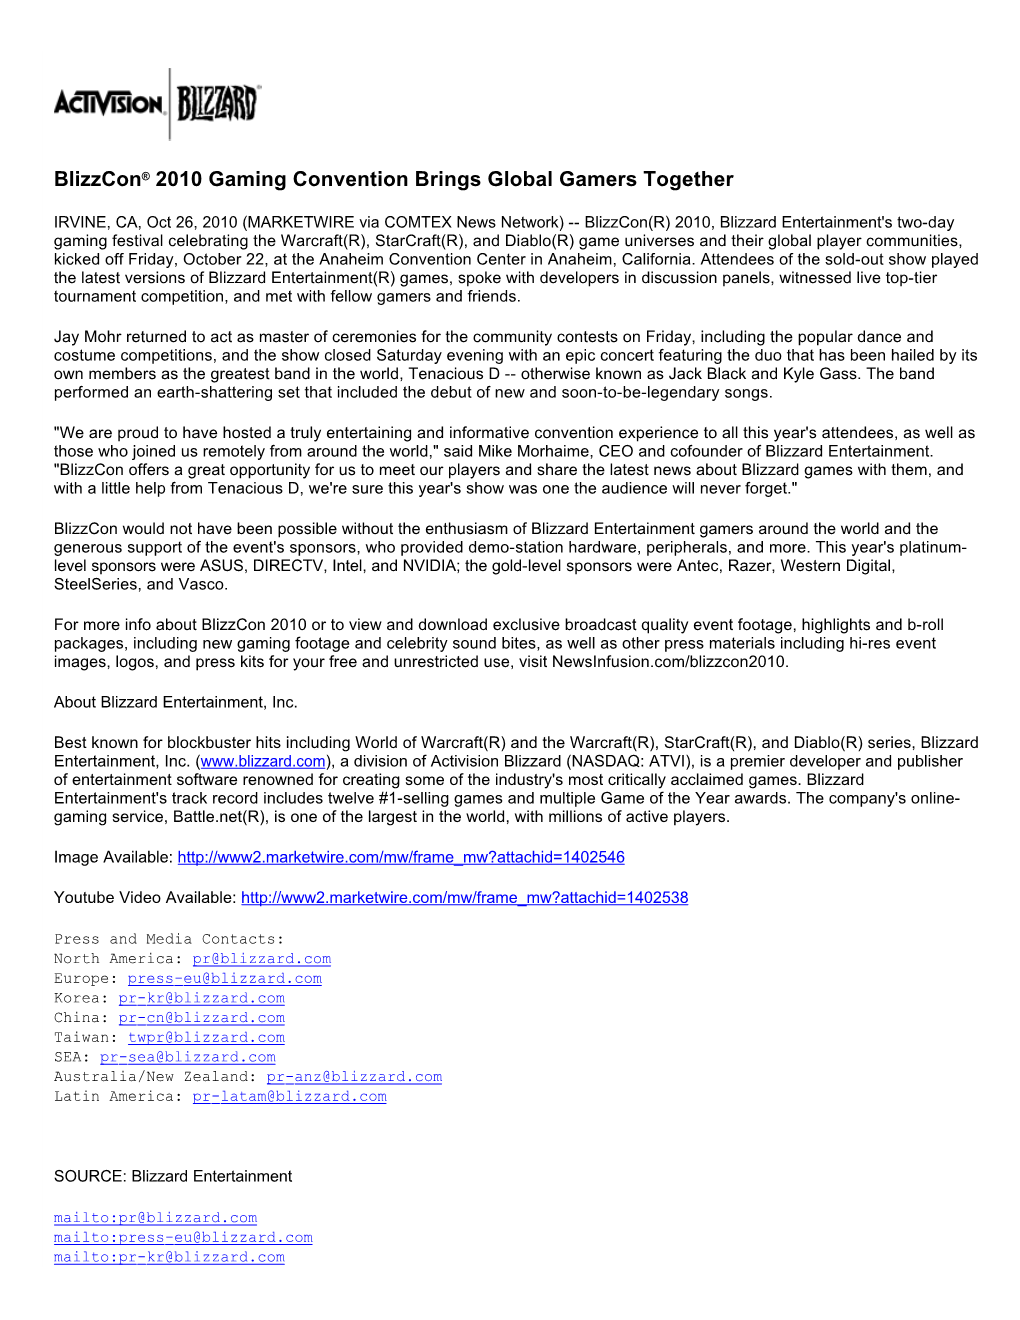 Blizzcon® 2010 Gaming Convention Brings Global Gamers Together